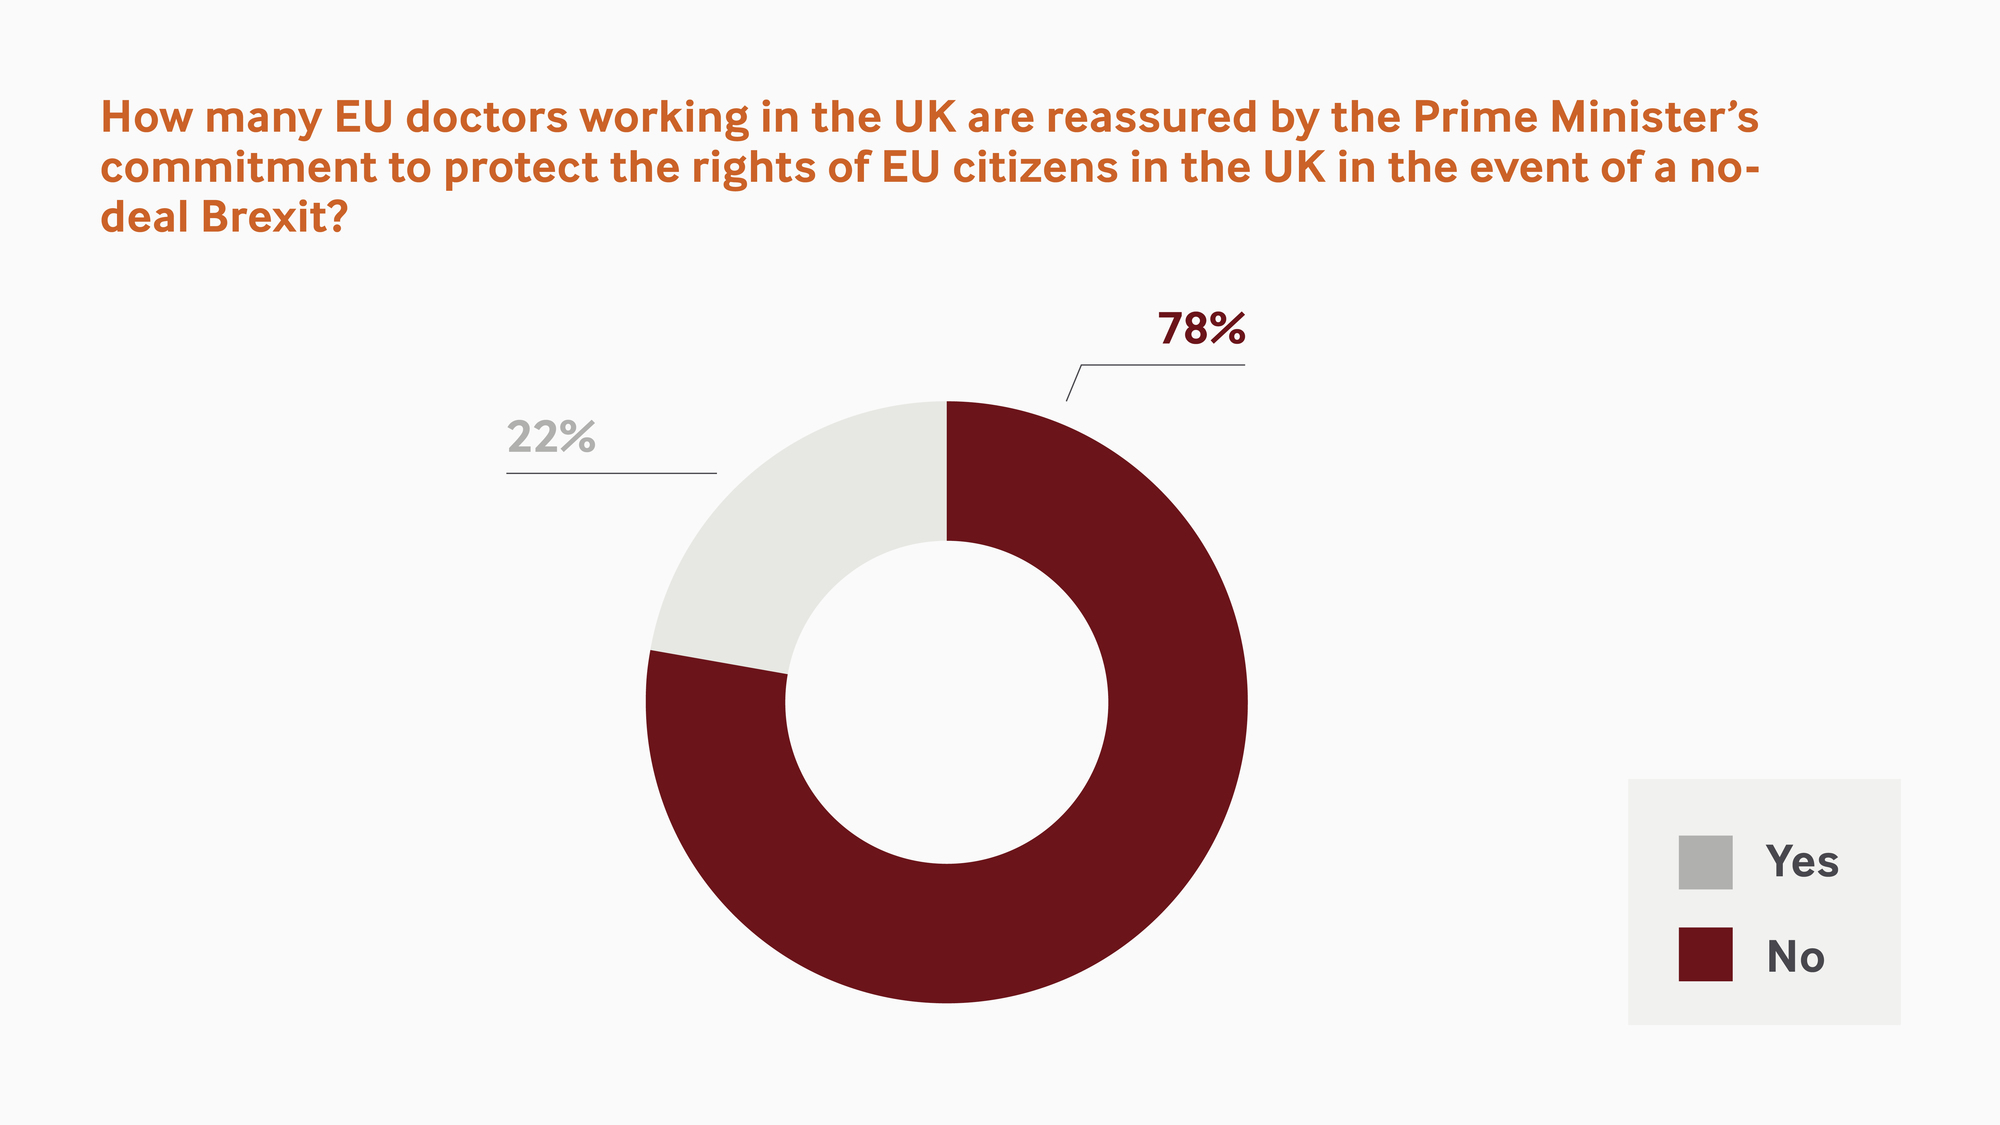 EU doctors reassured by the prime minister